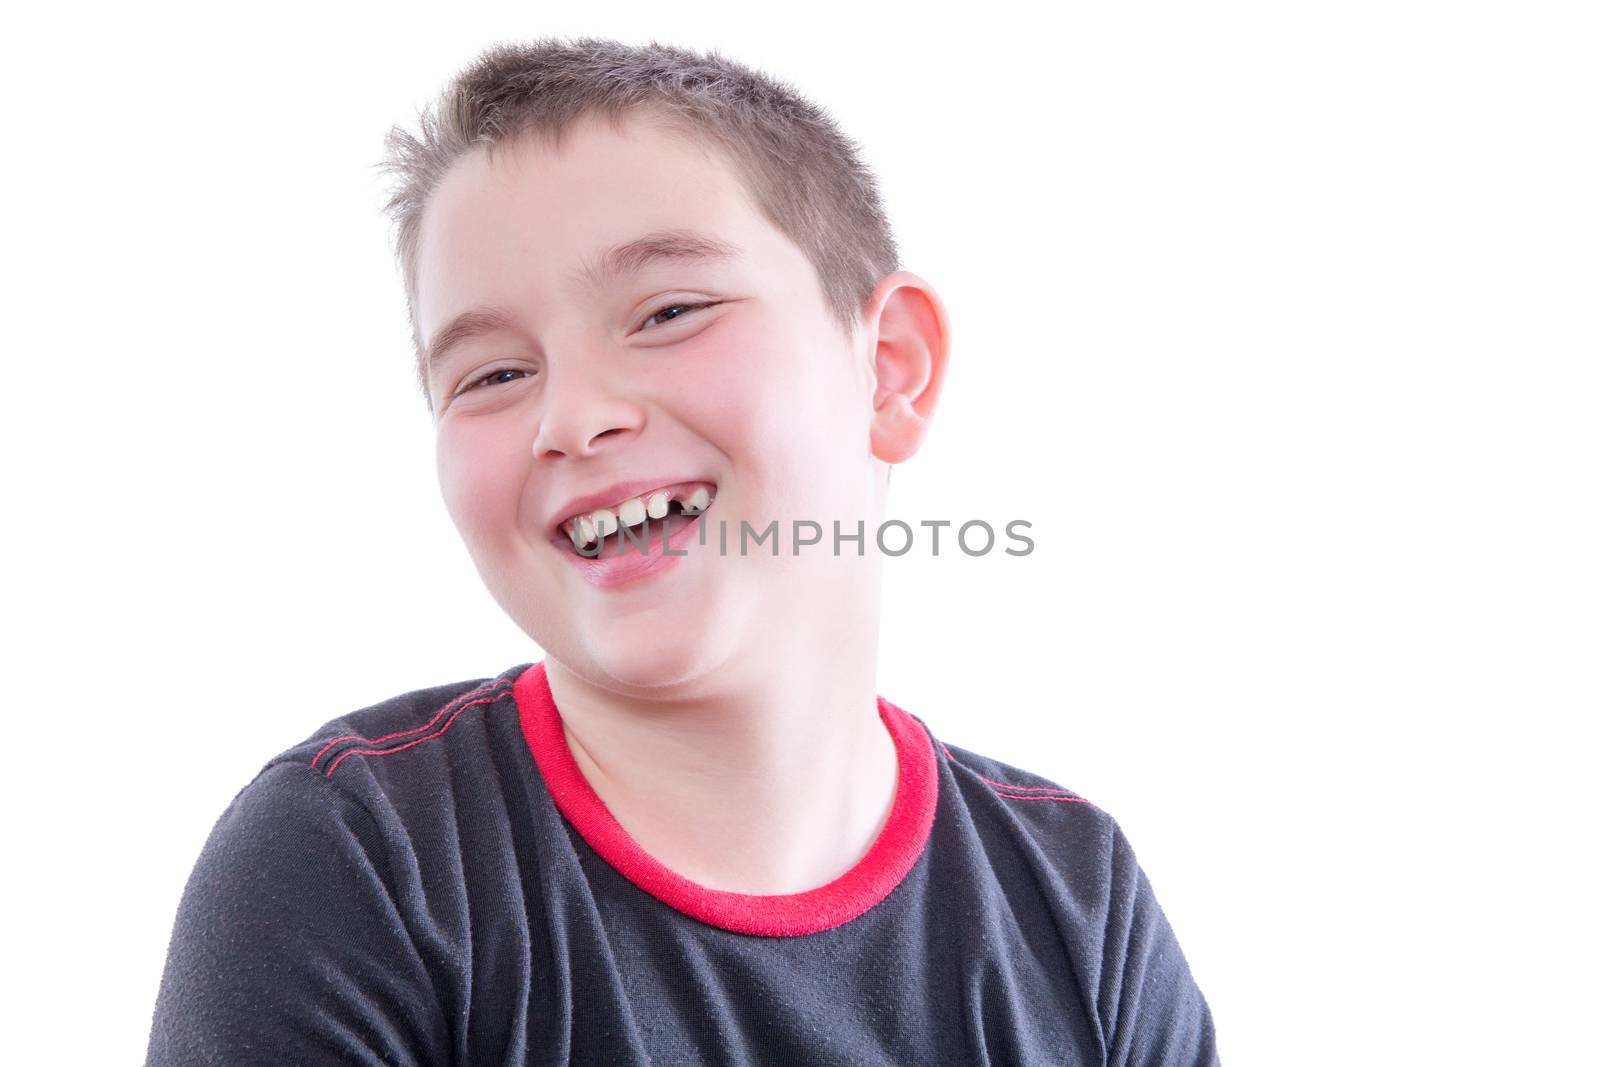 Head and Shoulders Close Up Portrait of Young Boy Wearing Black and Red Shirt Laughing and Showing Braces in Bright Studio with White Background and Copy Space